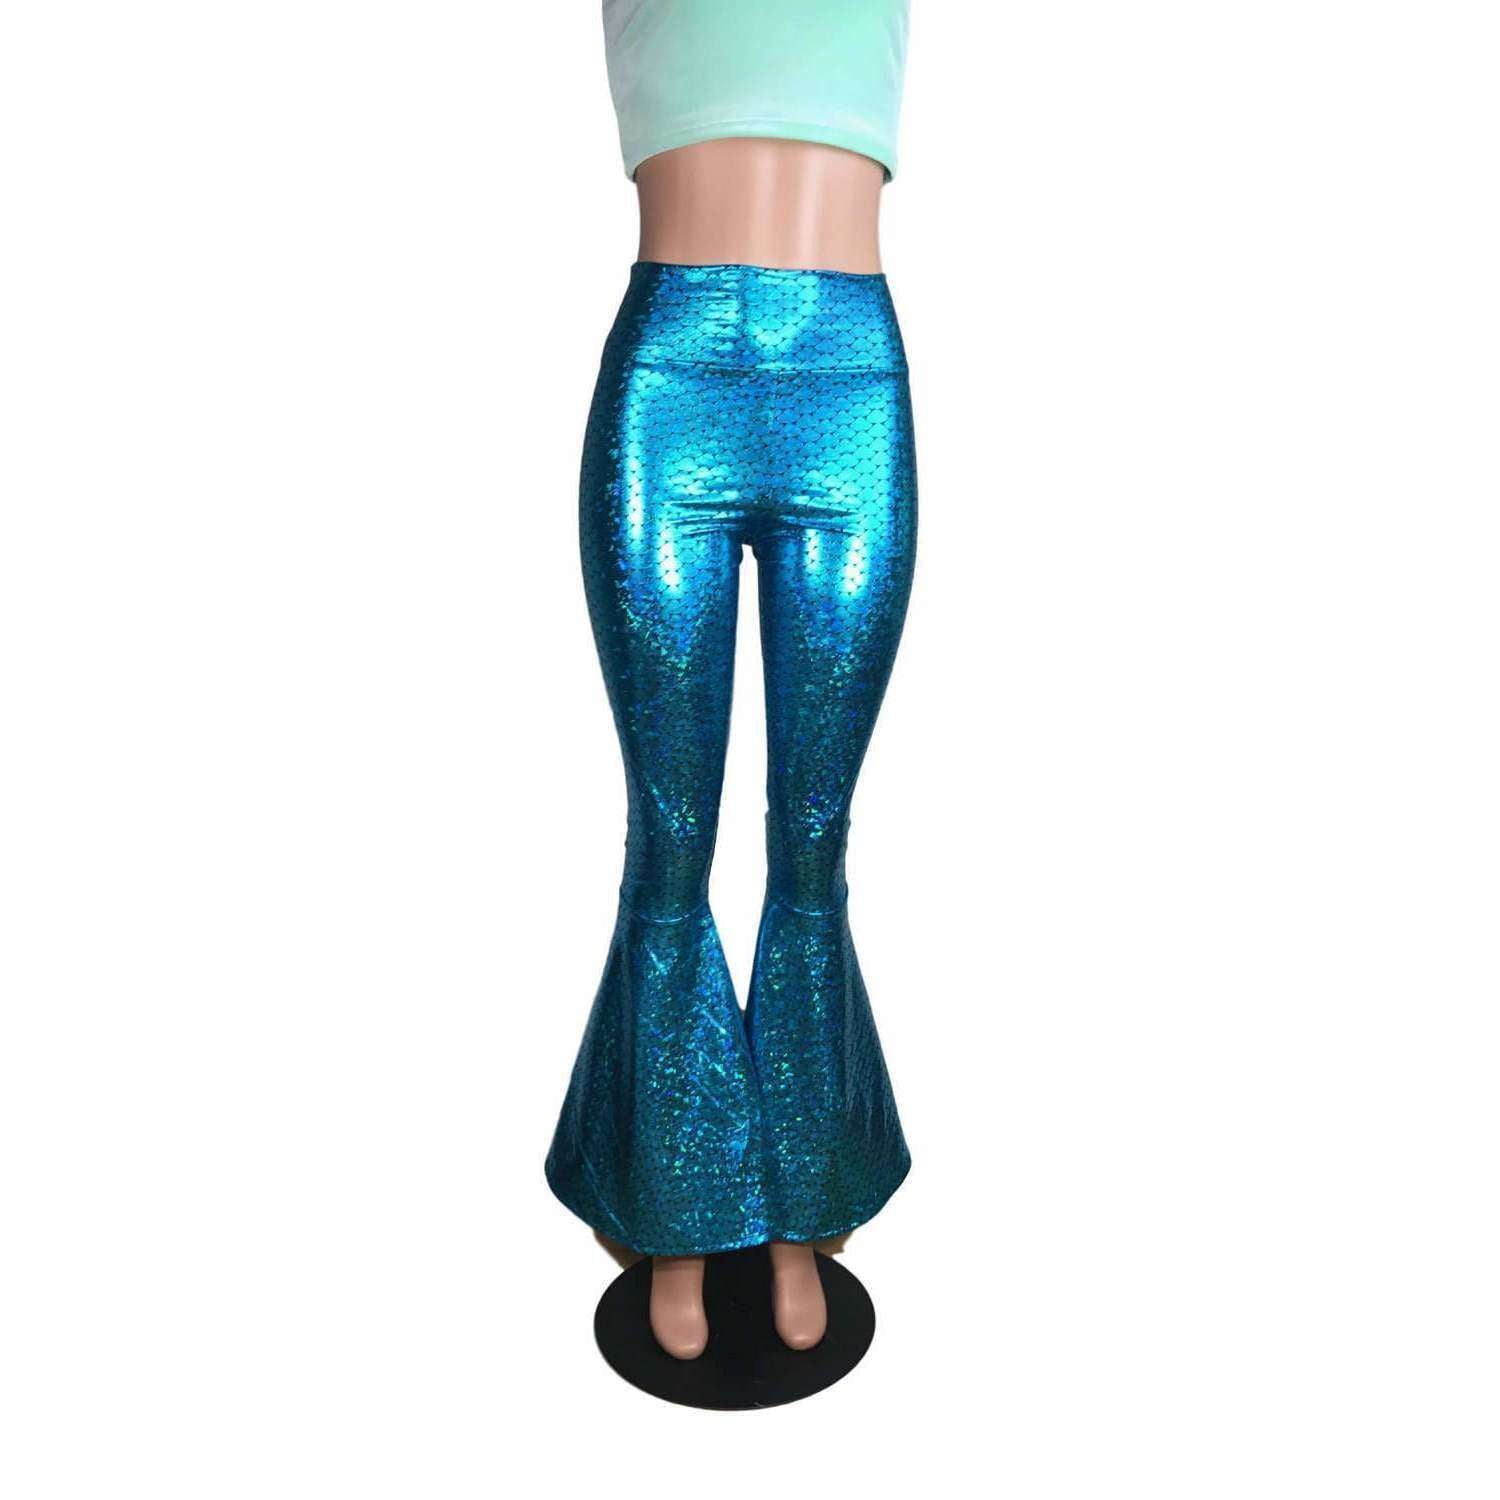 Mermaid Bell Bottoms - Turquoise Metallic Scales Flare Pants